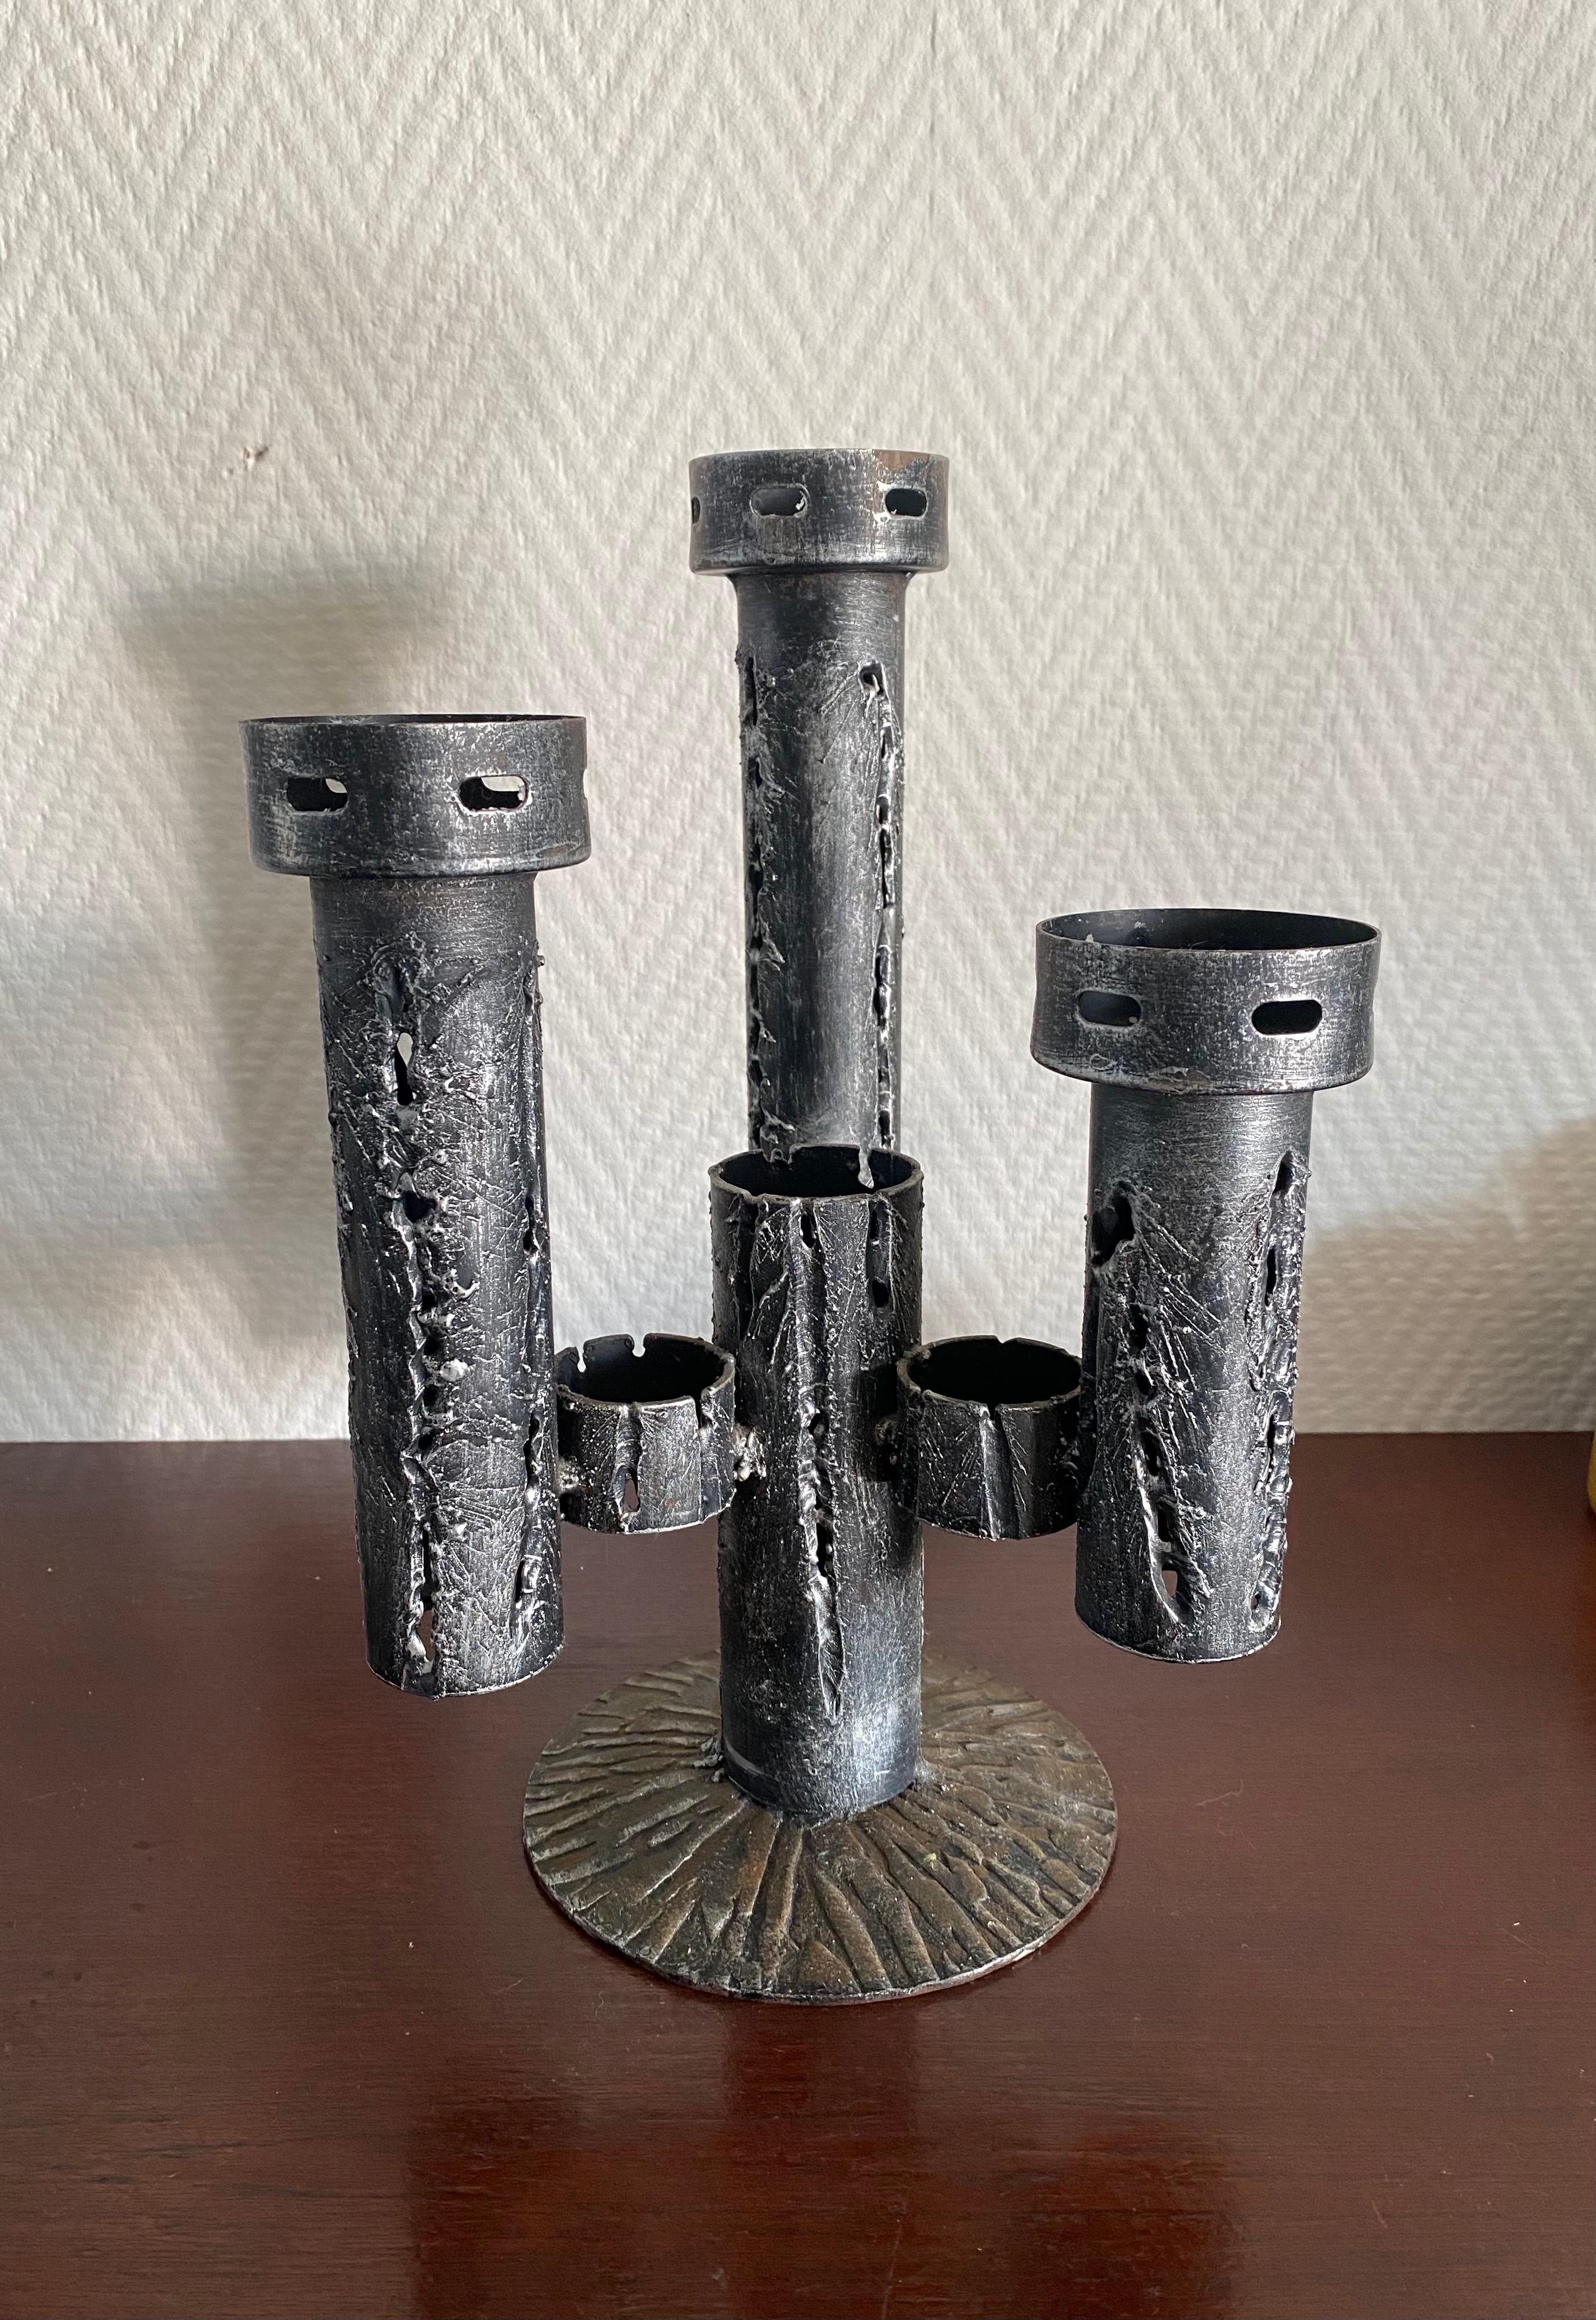 Stunning Brutalist piece with space for three candles. Design period ca, 1960s-1970s. 
This candlestick remains in good condition with slight traces of age and use. Nice patina! If you are interested in this item, feel free to make us a reasonable